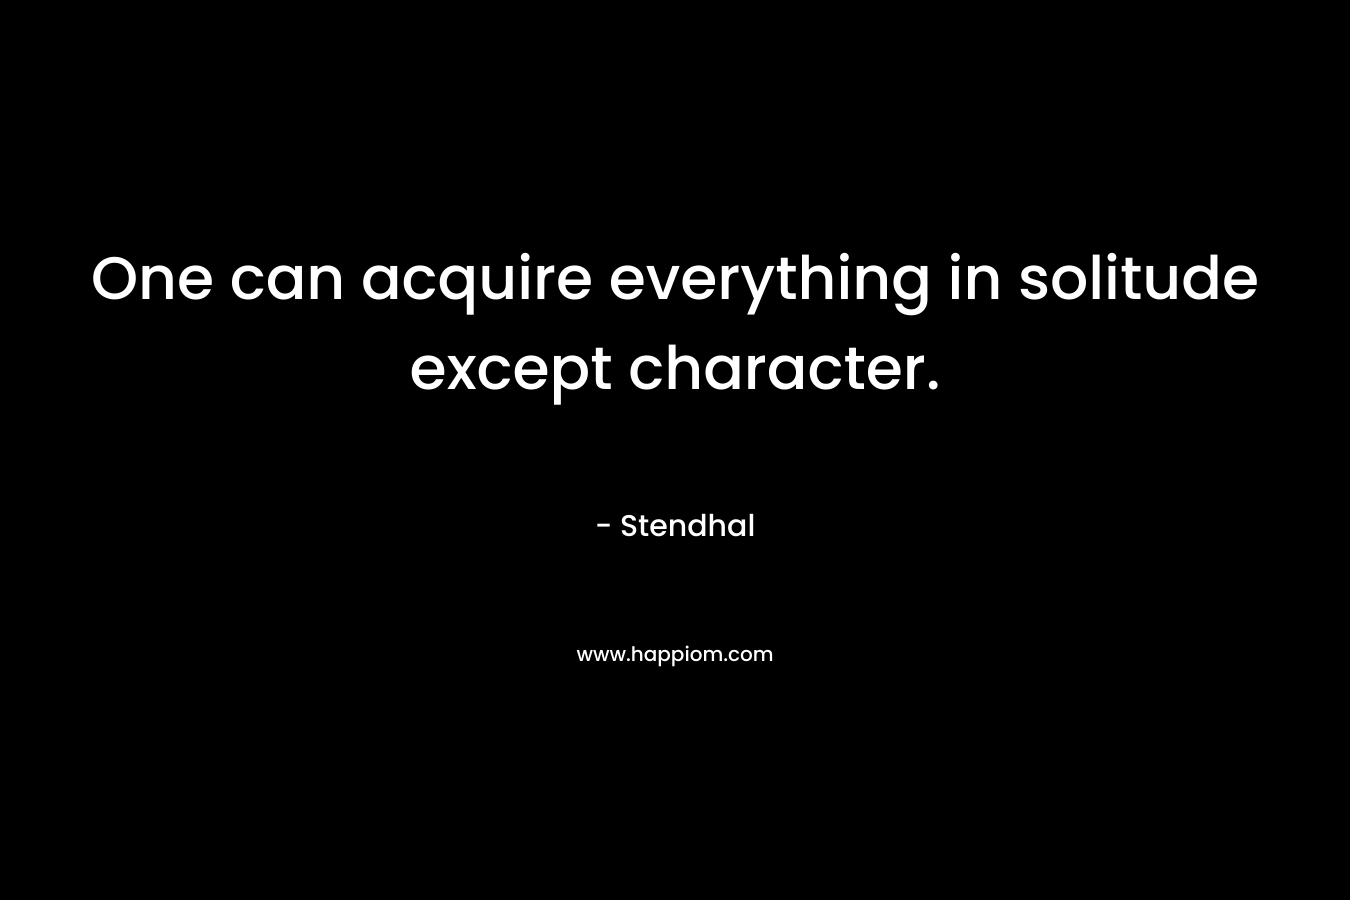 One can acquire everything in solitude except character. – Stendhal